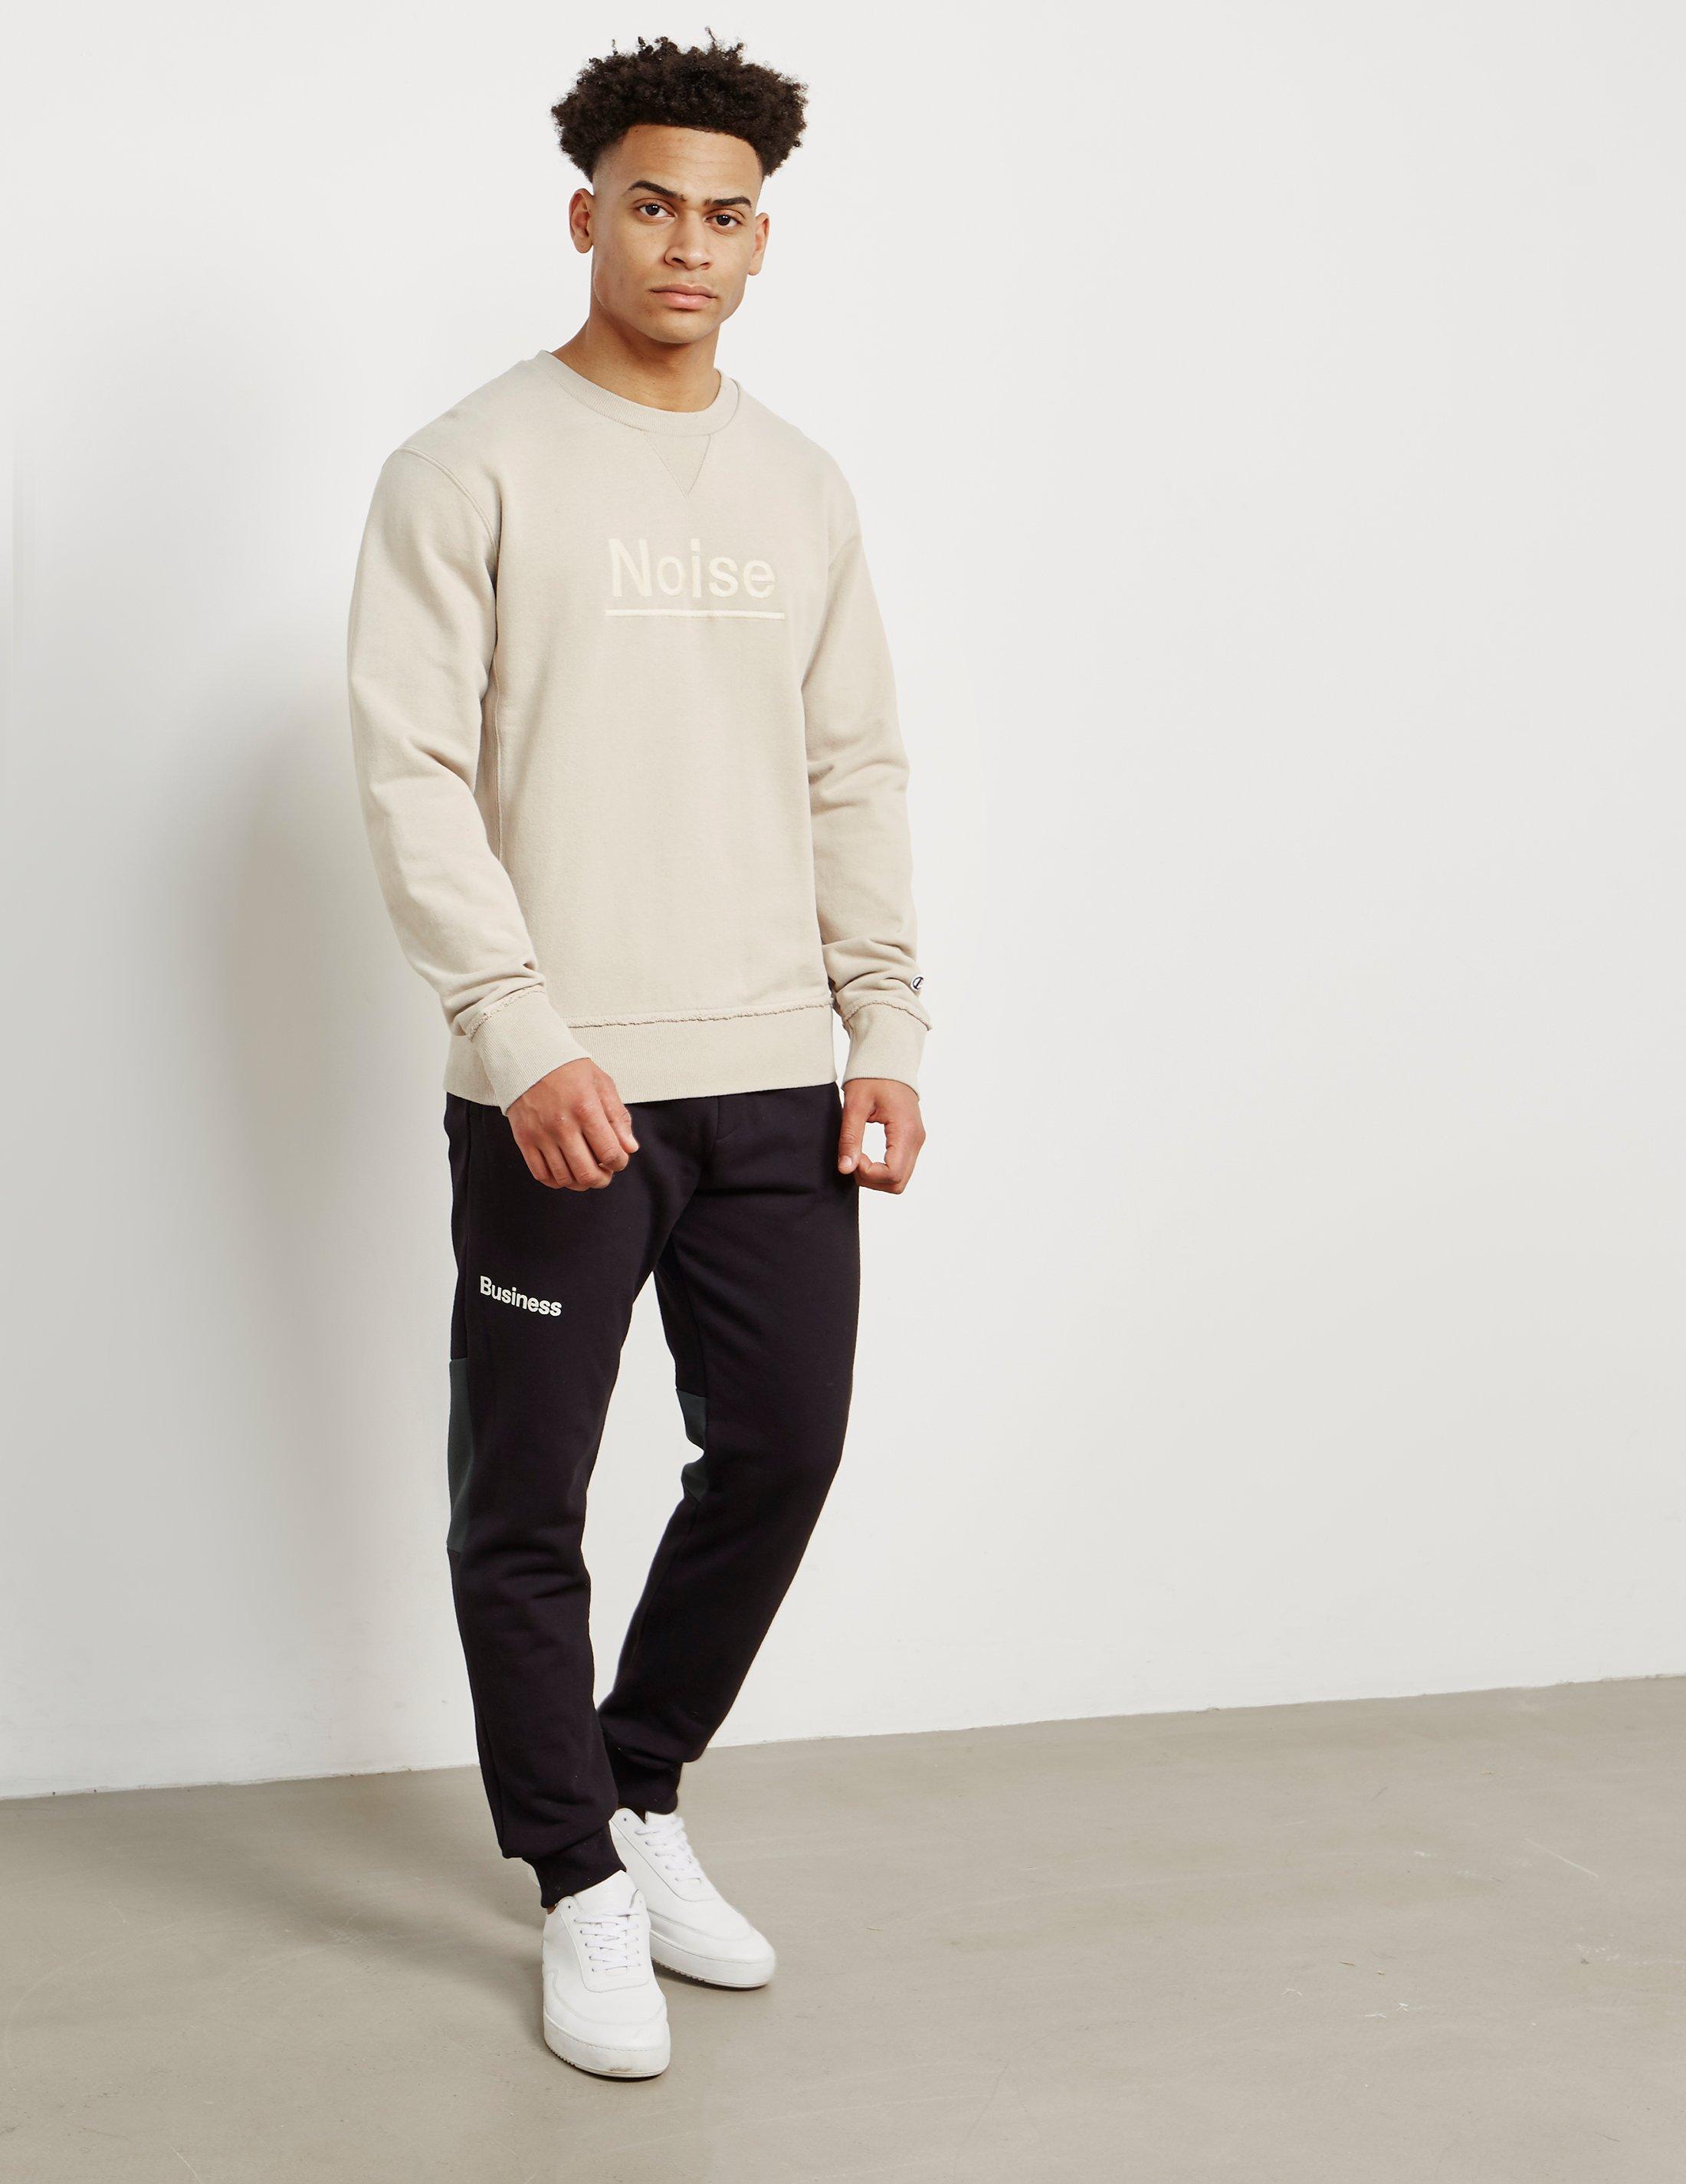 Champion Cotton Mens X Wood Wood Noise Sweatshirt - Online Exclusive  Taupe/taupe for Men - Lyst